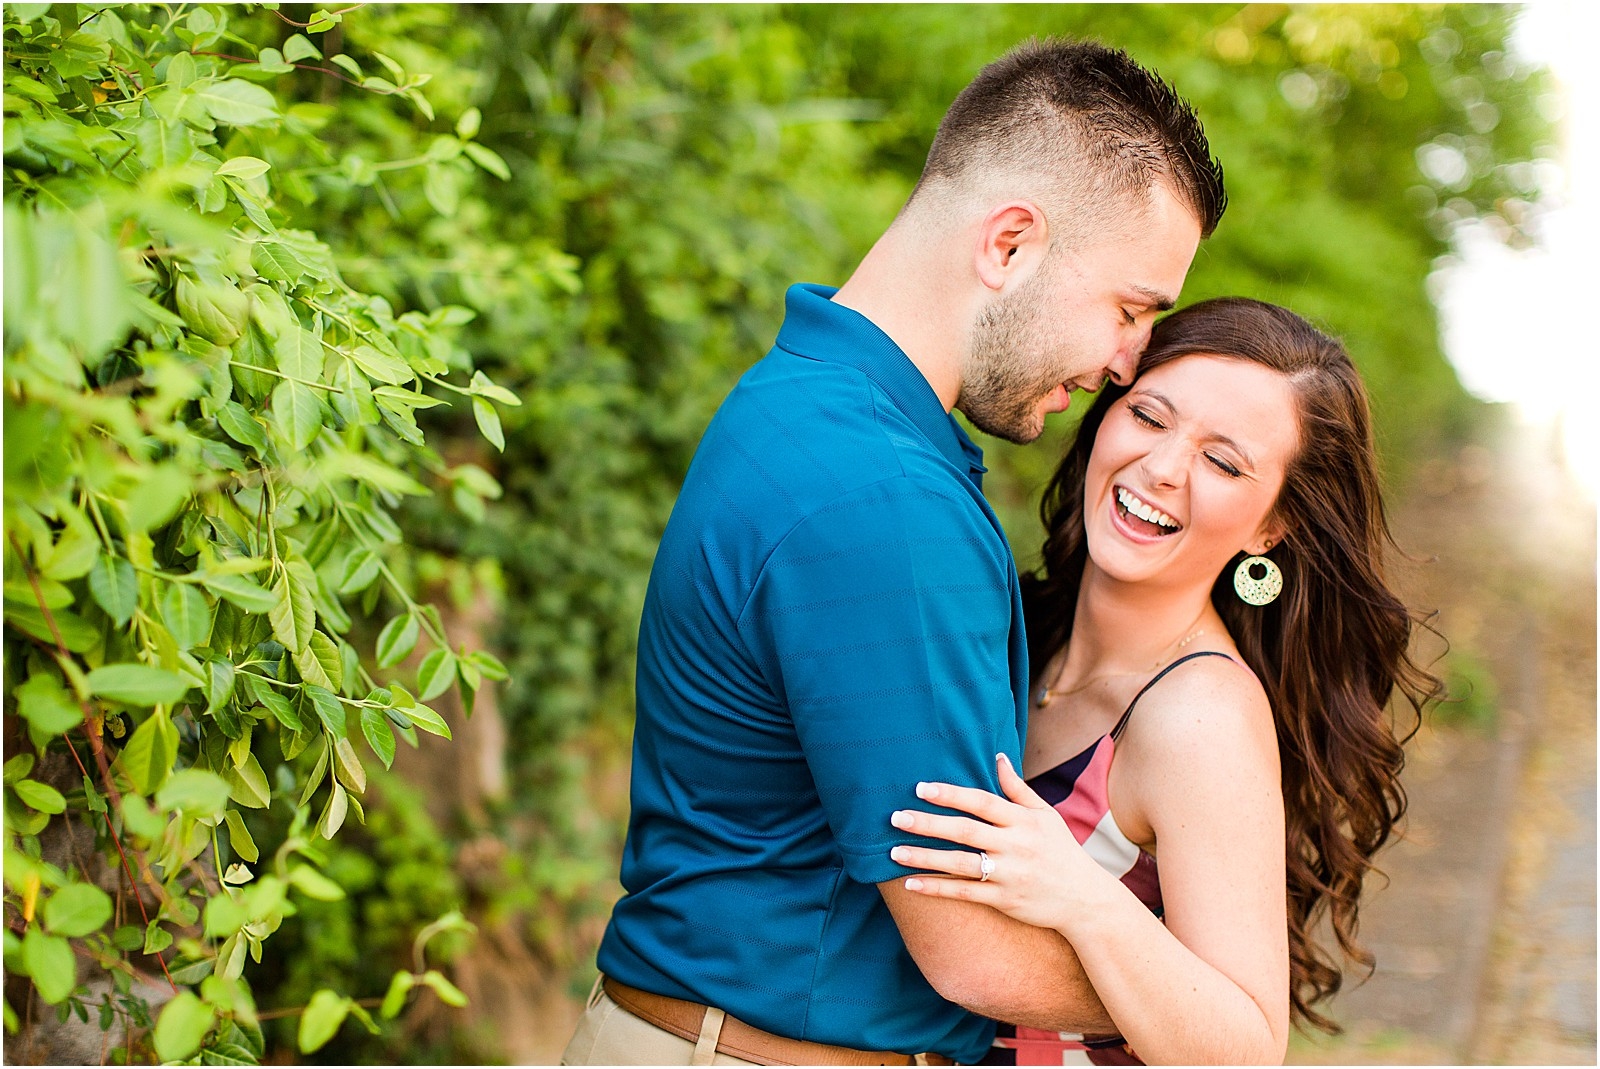 Downtown Newburgh Engagement Session | Matt and Blaire | Bret and Brandie Photography005.jpg